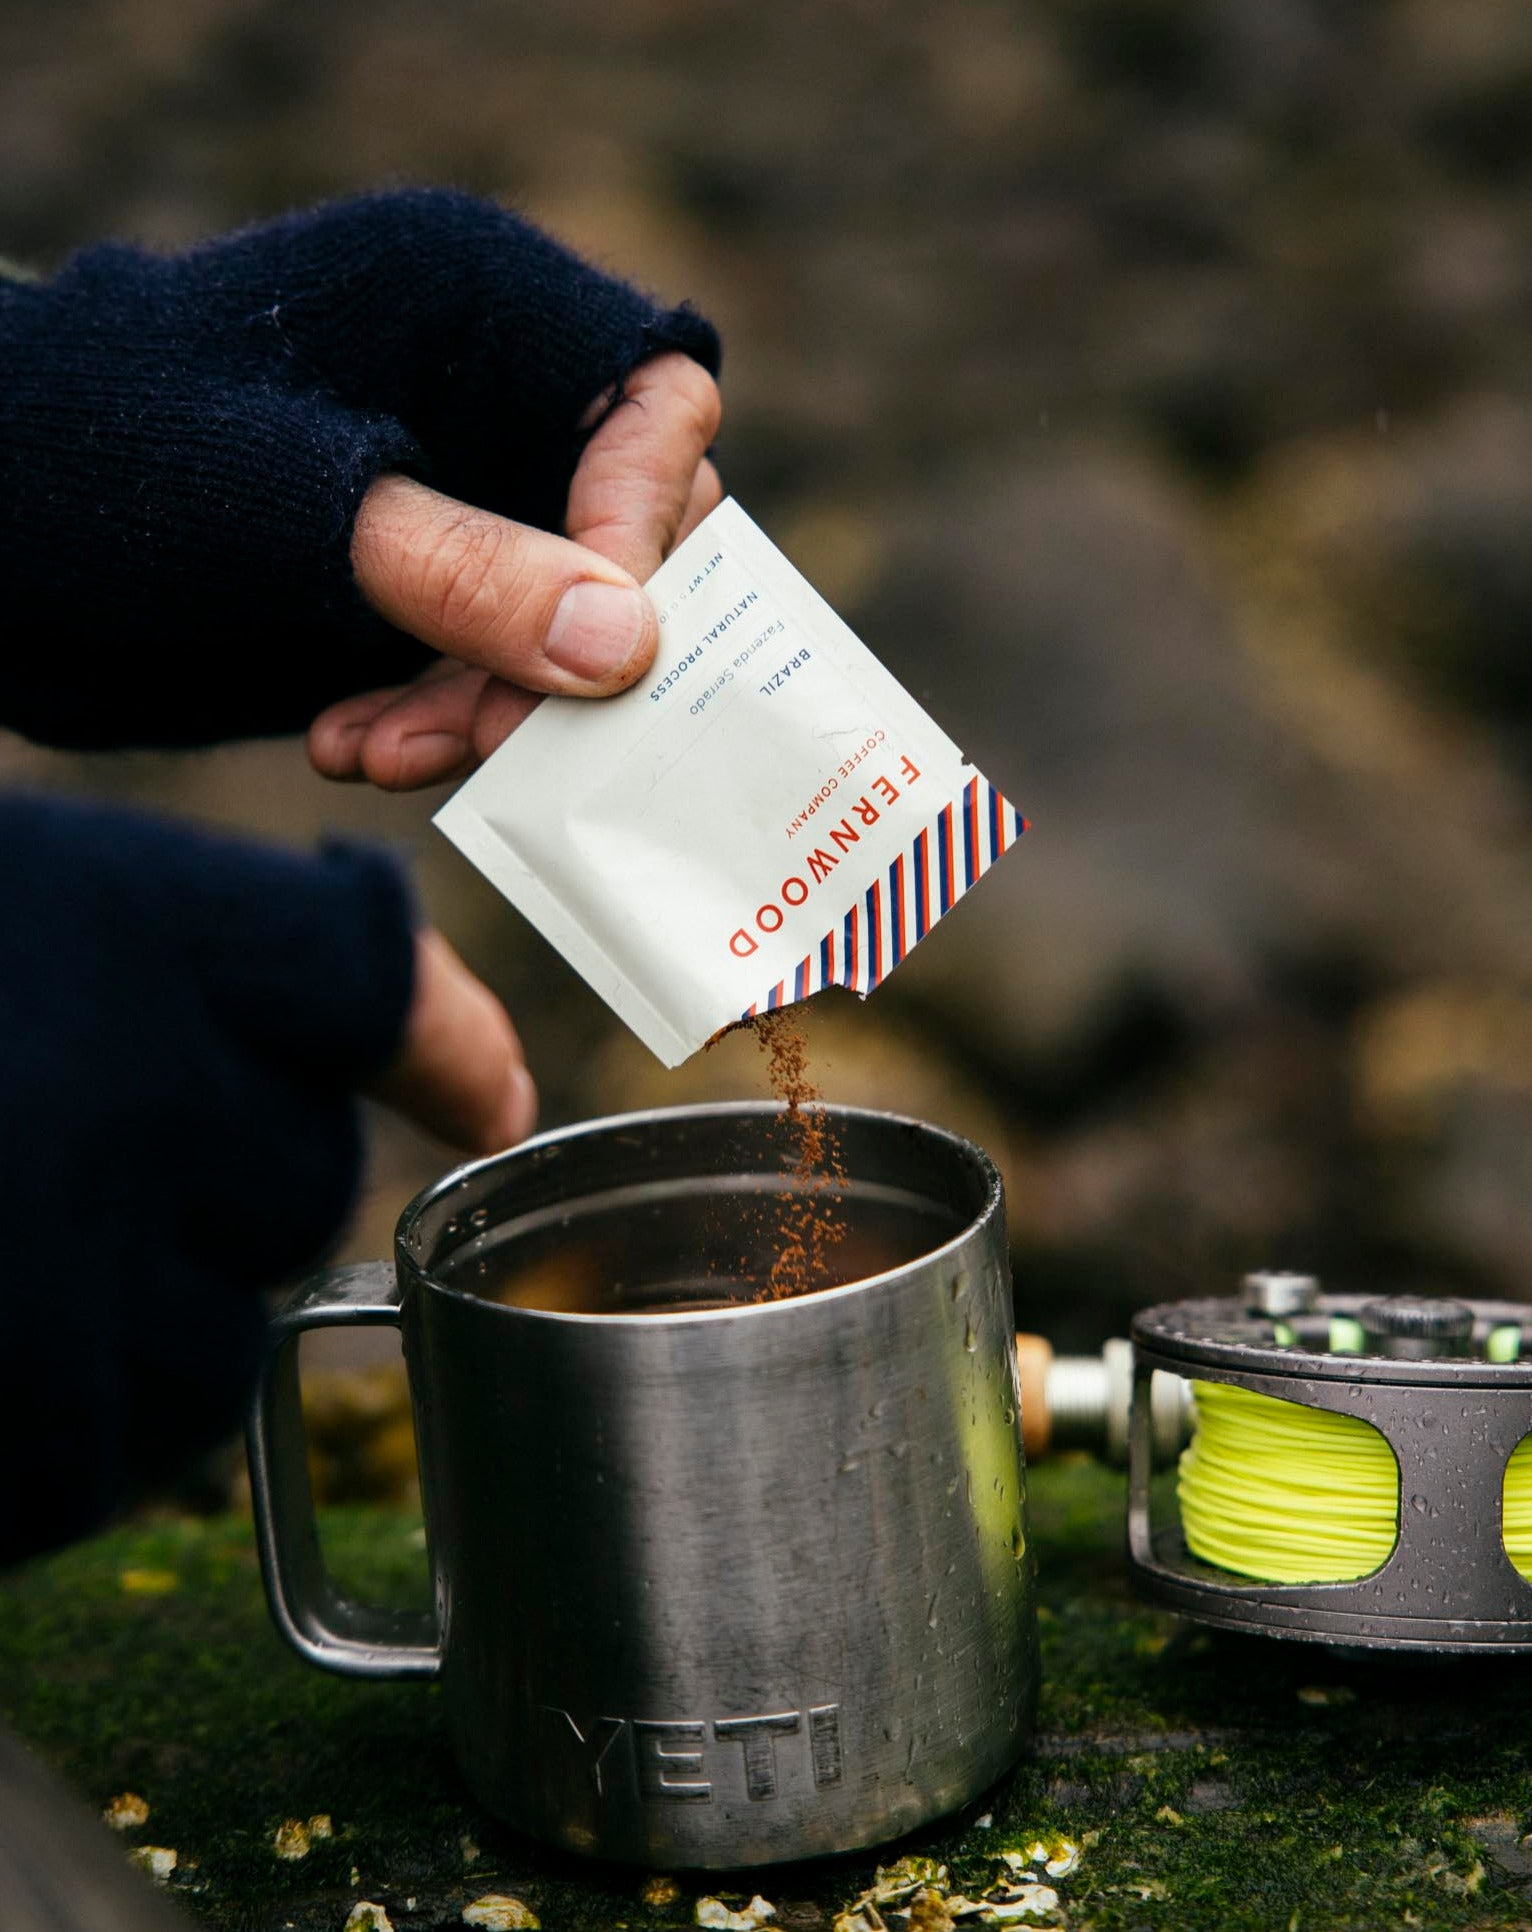 Fernwood coffee instant pack being poured into a Yeti travel mug